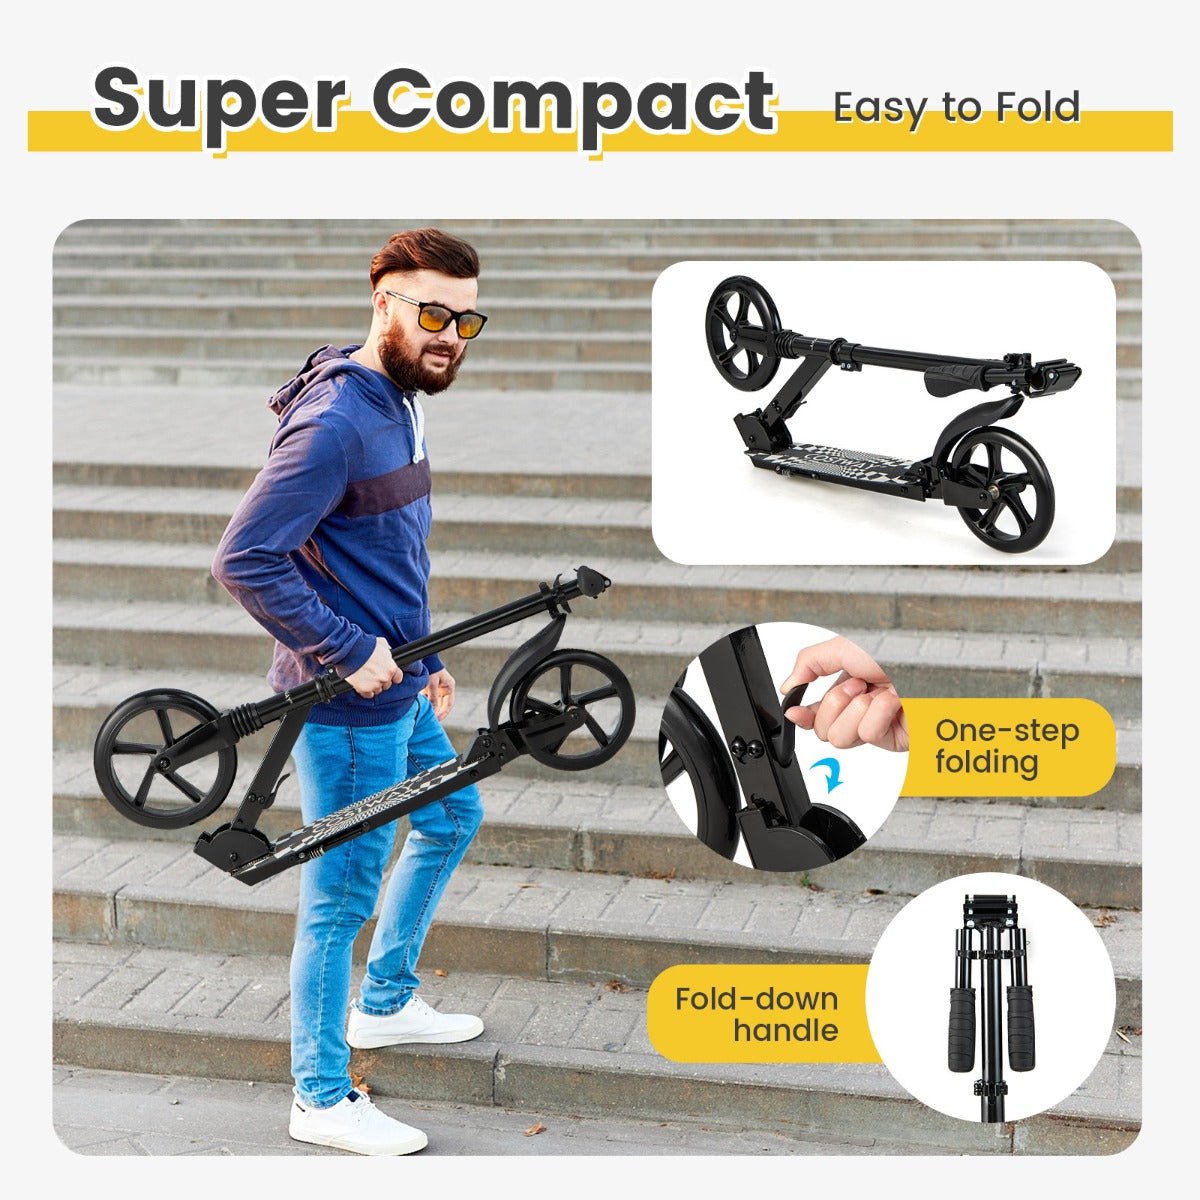 Foldable Kids Scooter: Adjustable Height, LED Light, Easy to Carry (Black)